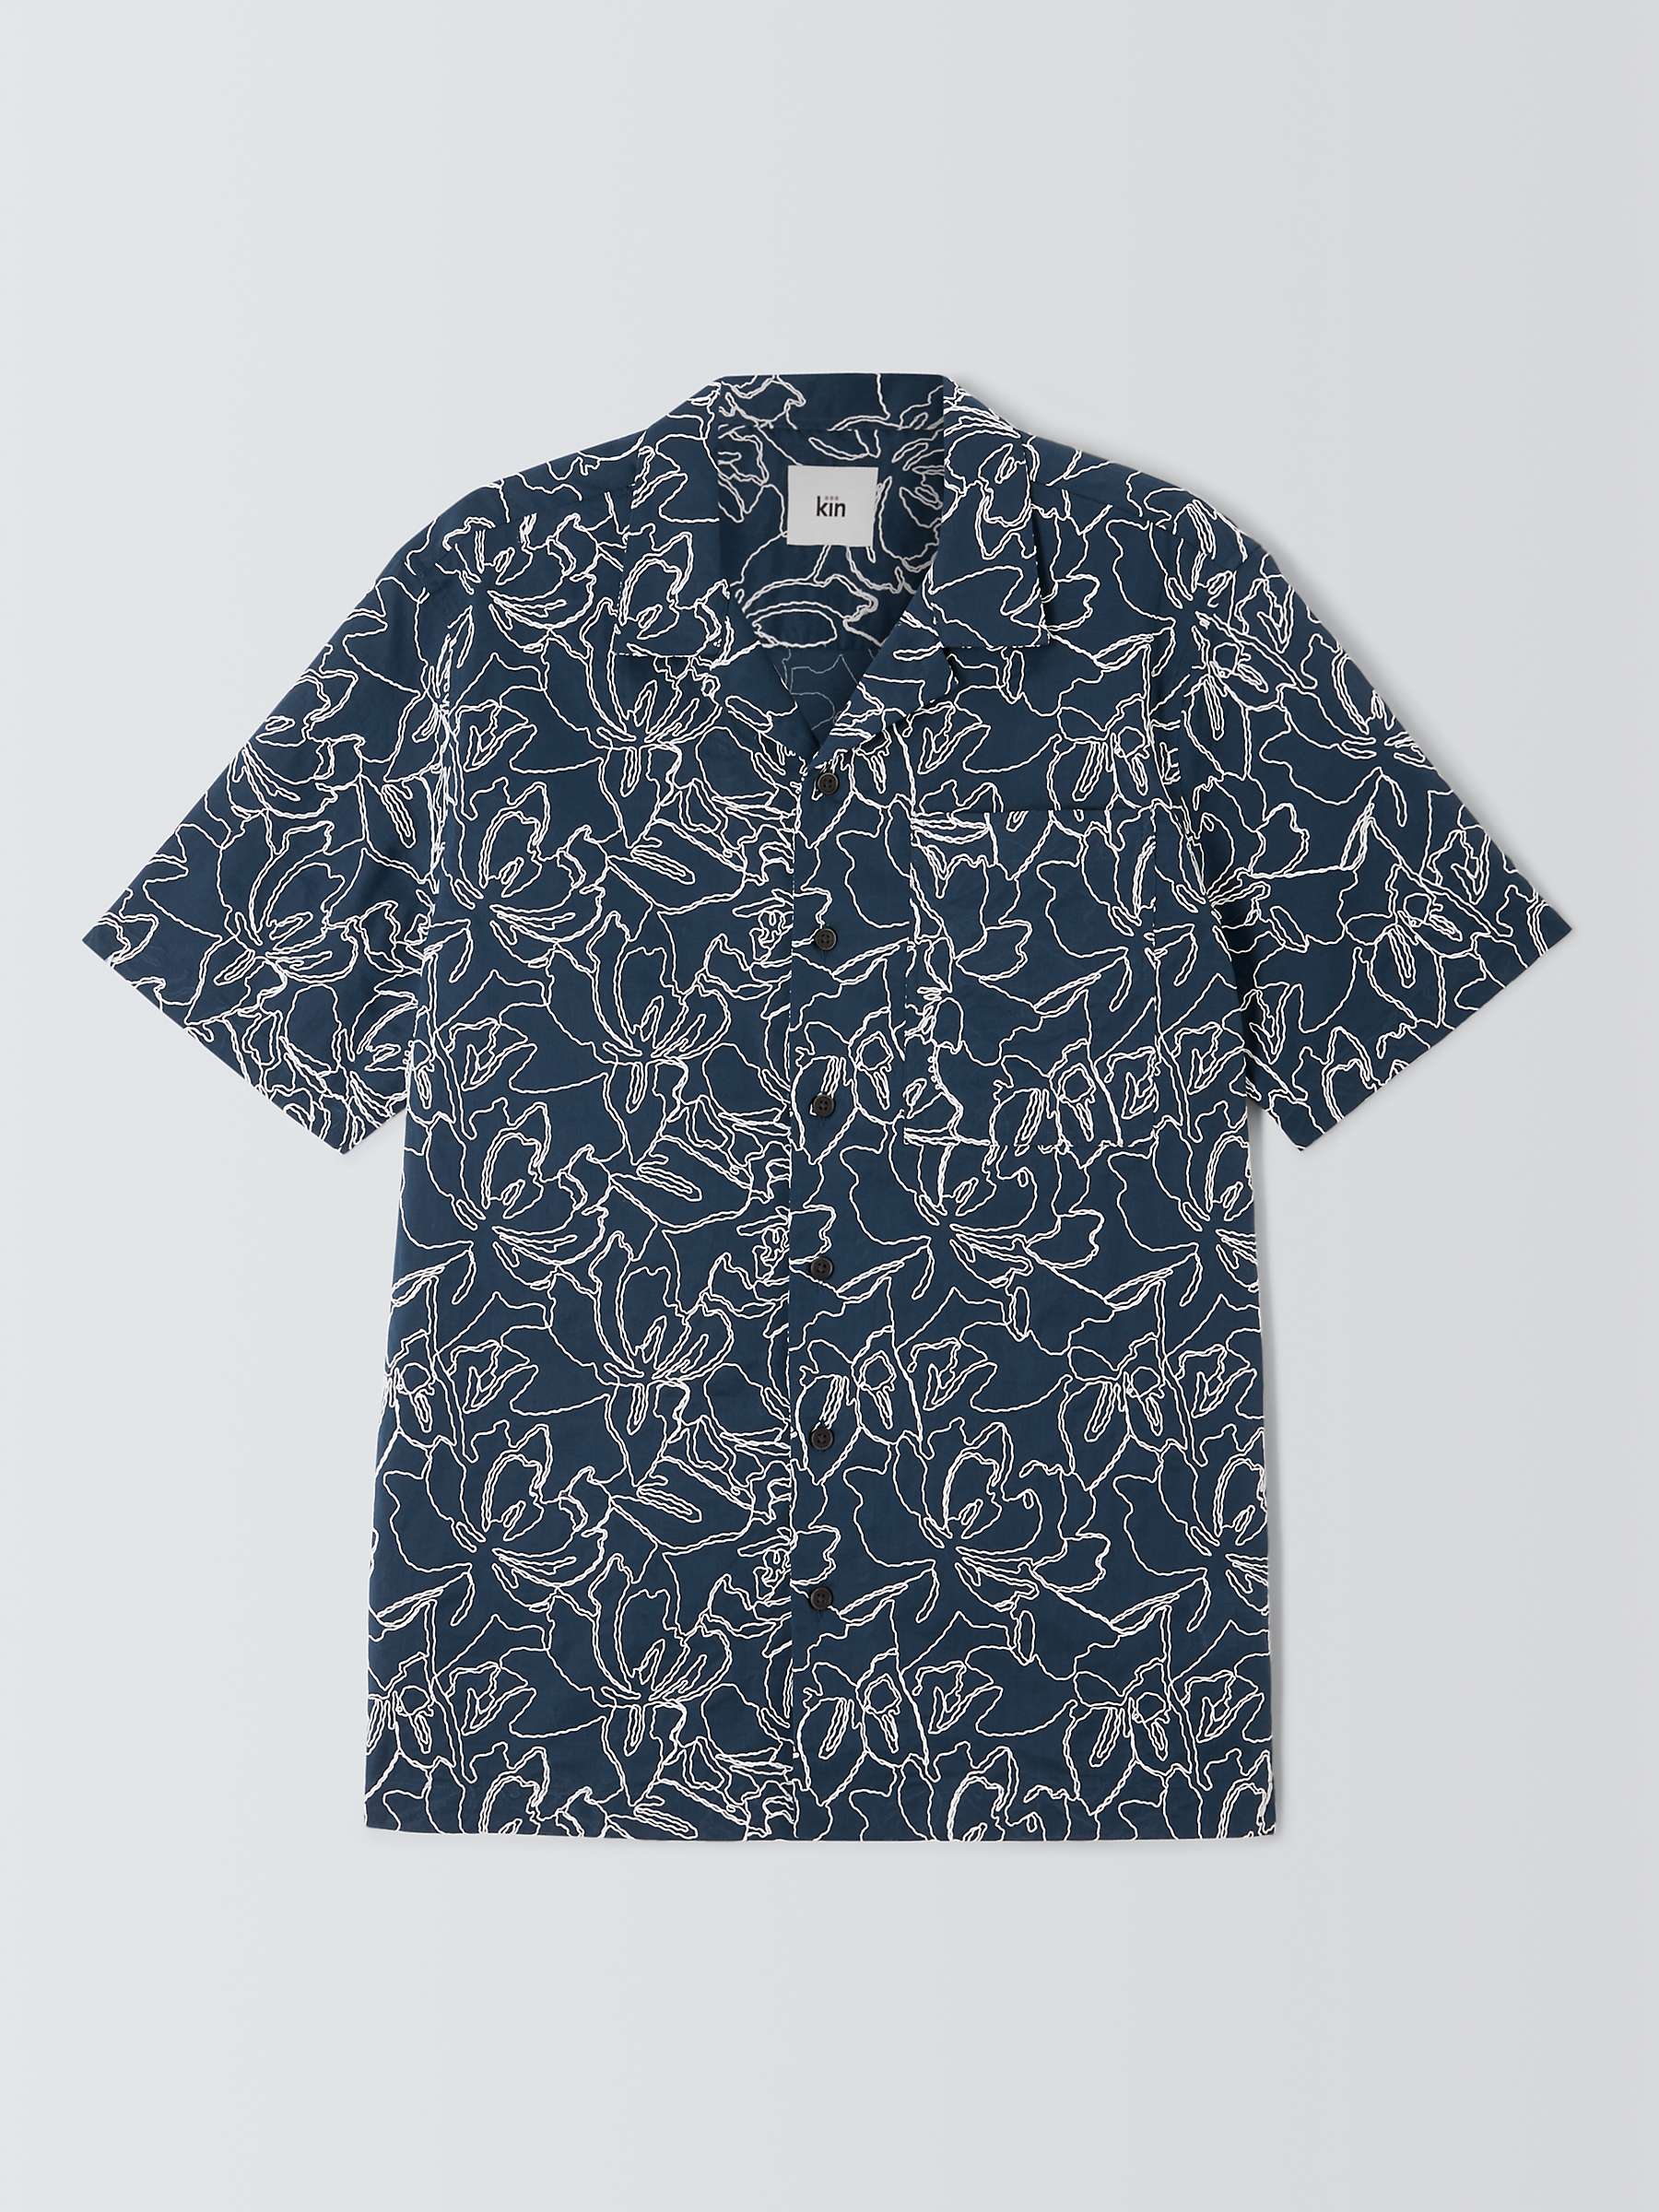 Buy Kin Short Sleeve All Embroidery Shirt, Navy/White Online at johnlewis.com